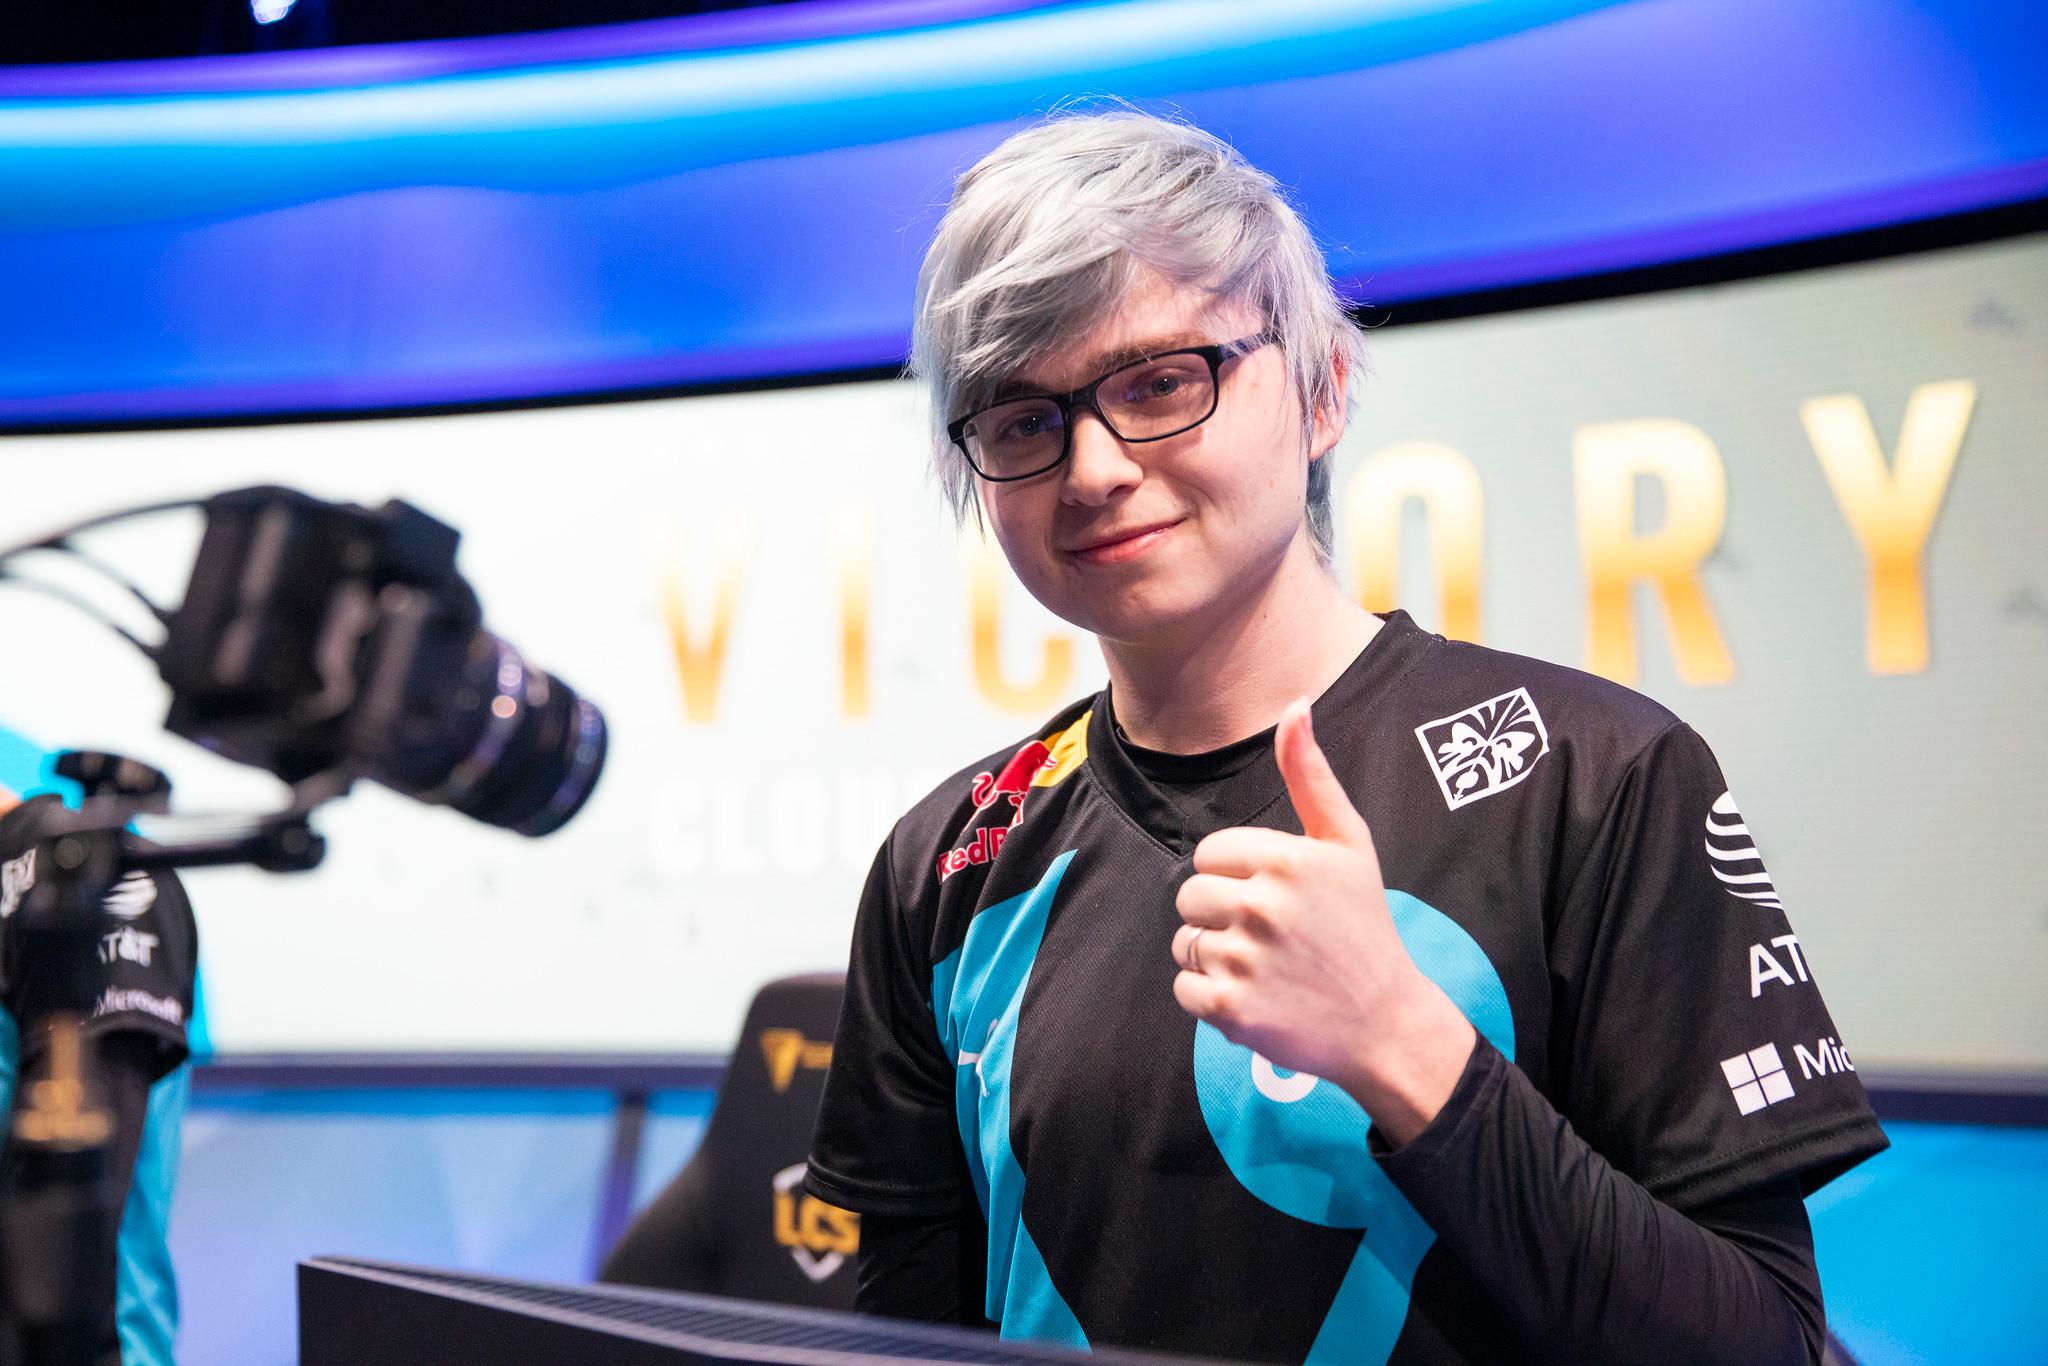 Sneaky playing LCS for Cloud 9